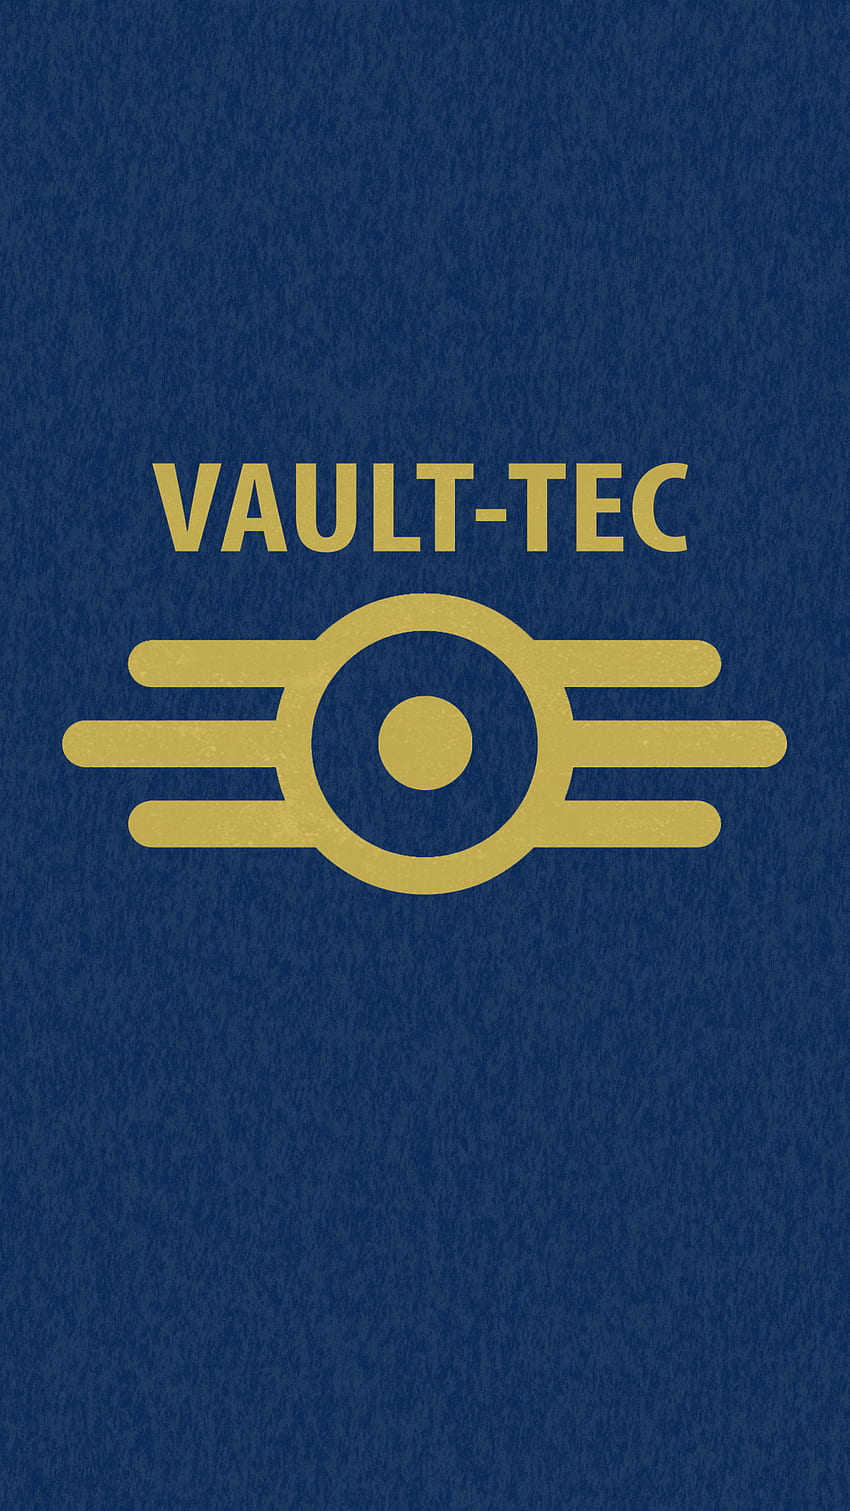 My Fallout Vault- Tec Android Setup with HD phone wallpaper